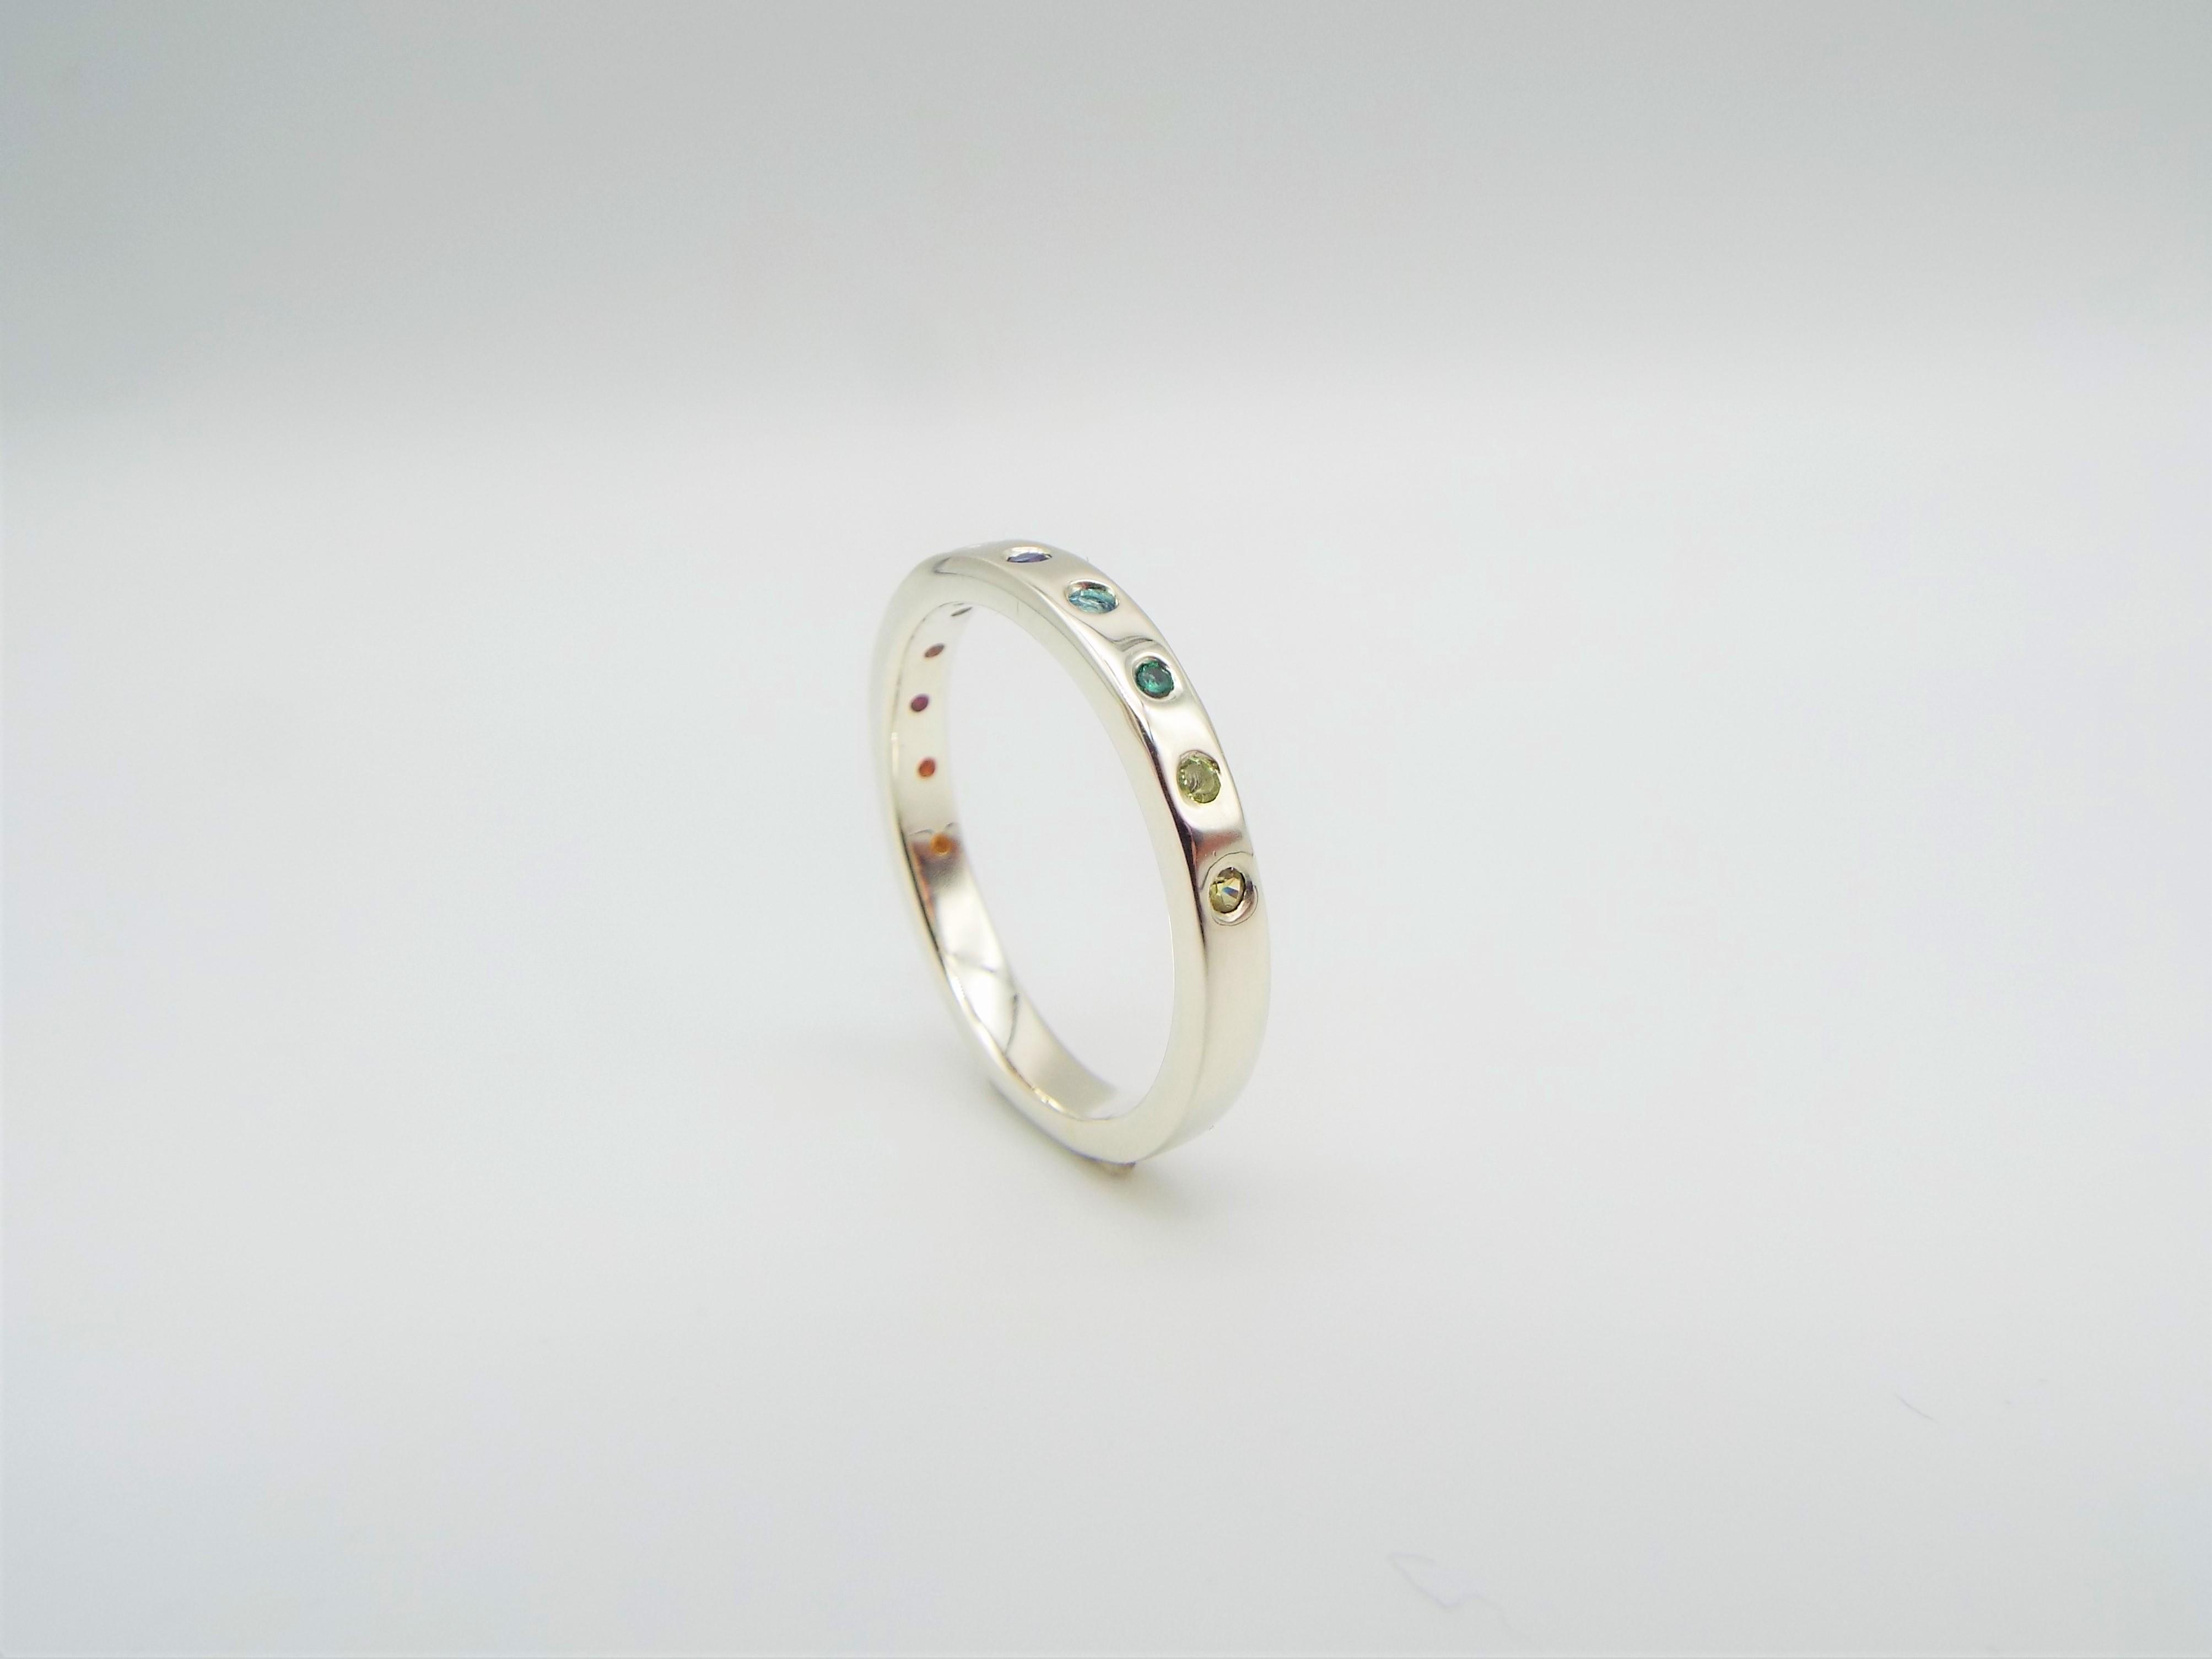 Multicolour gemstone ring in 9ct white gold